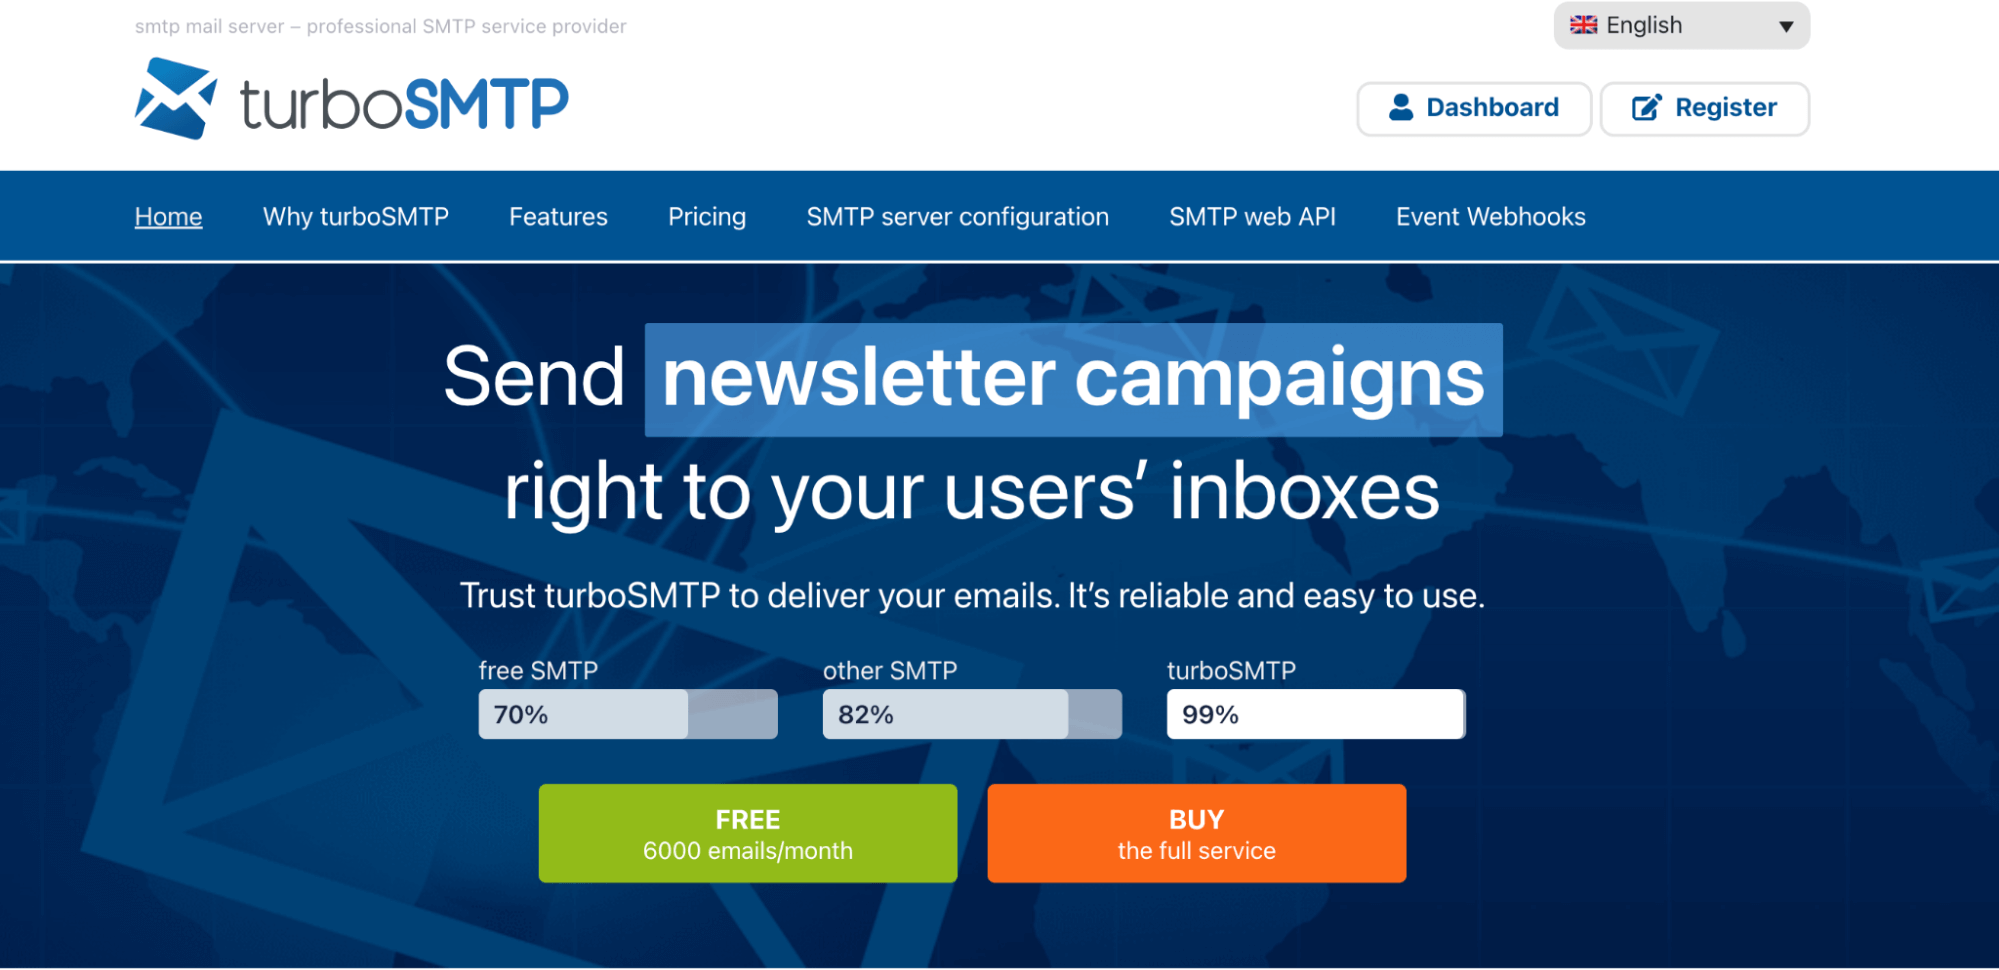 "turbosmtp" focus on maximizing email deliverability